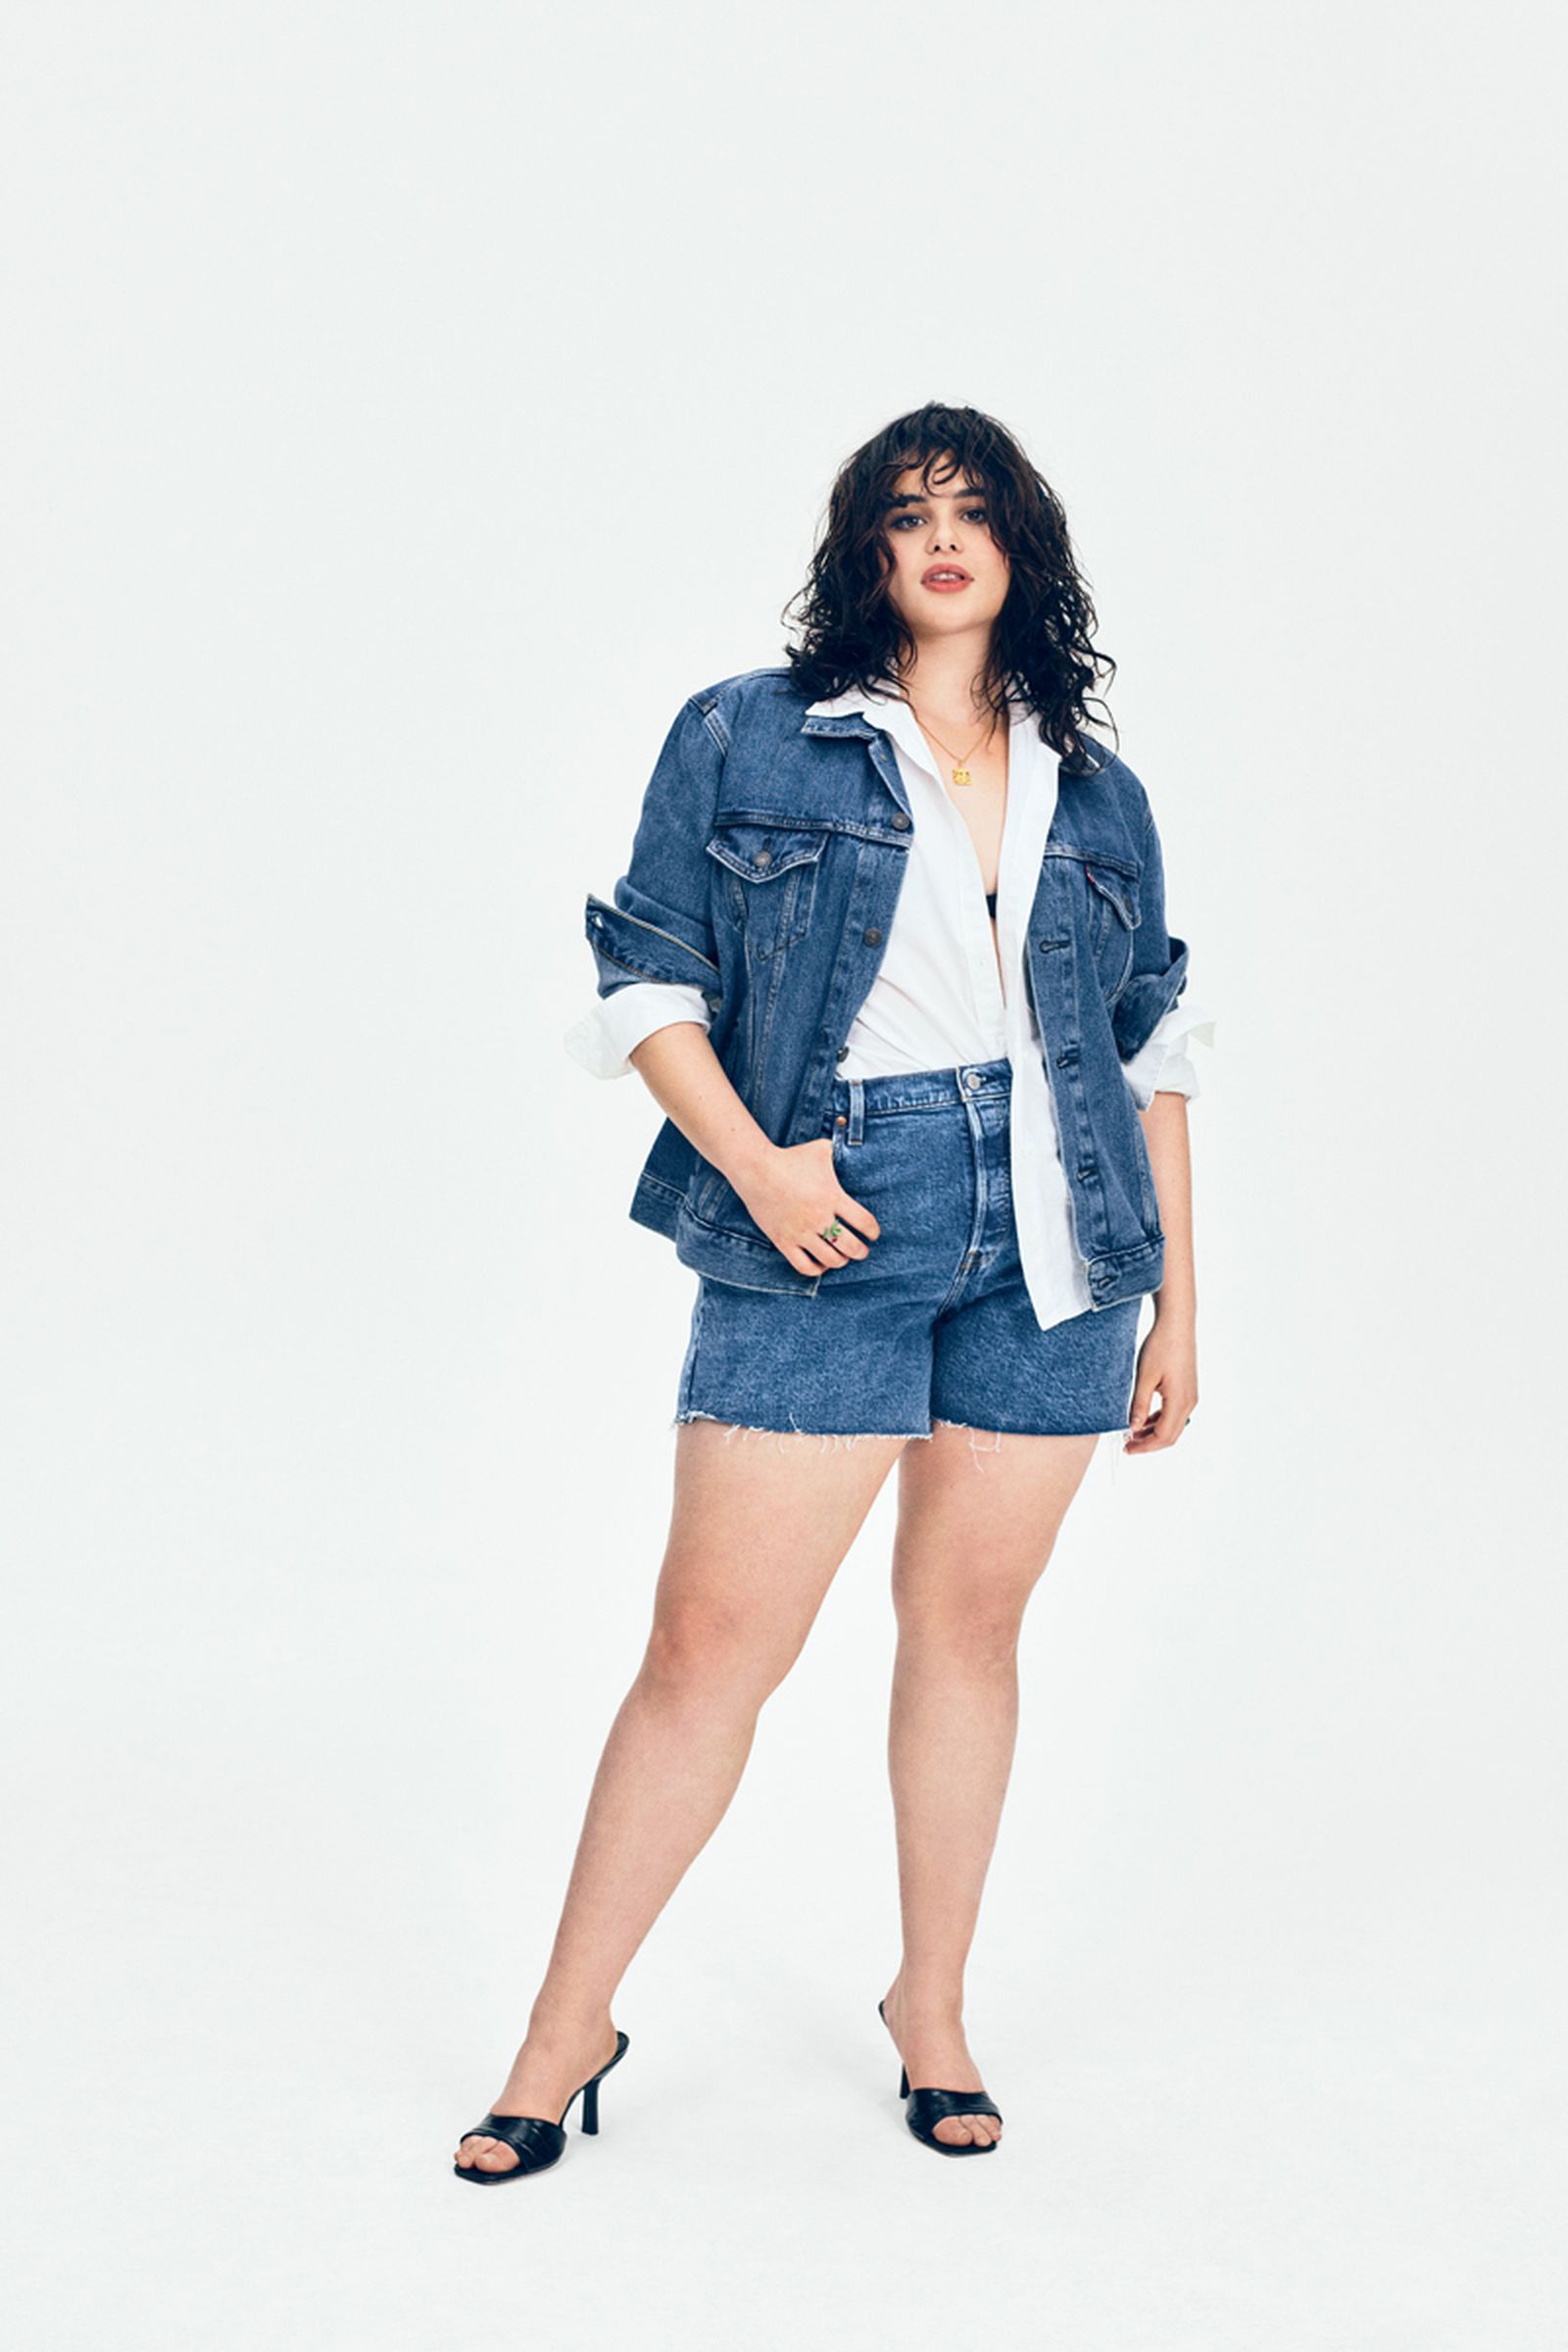 levis-501-day-2021-campaign- (12)